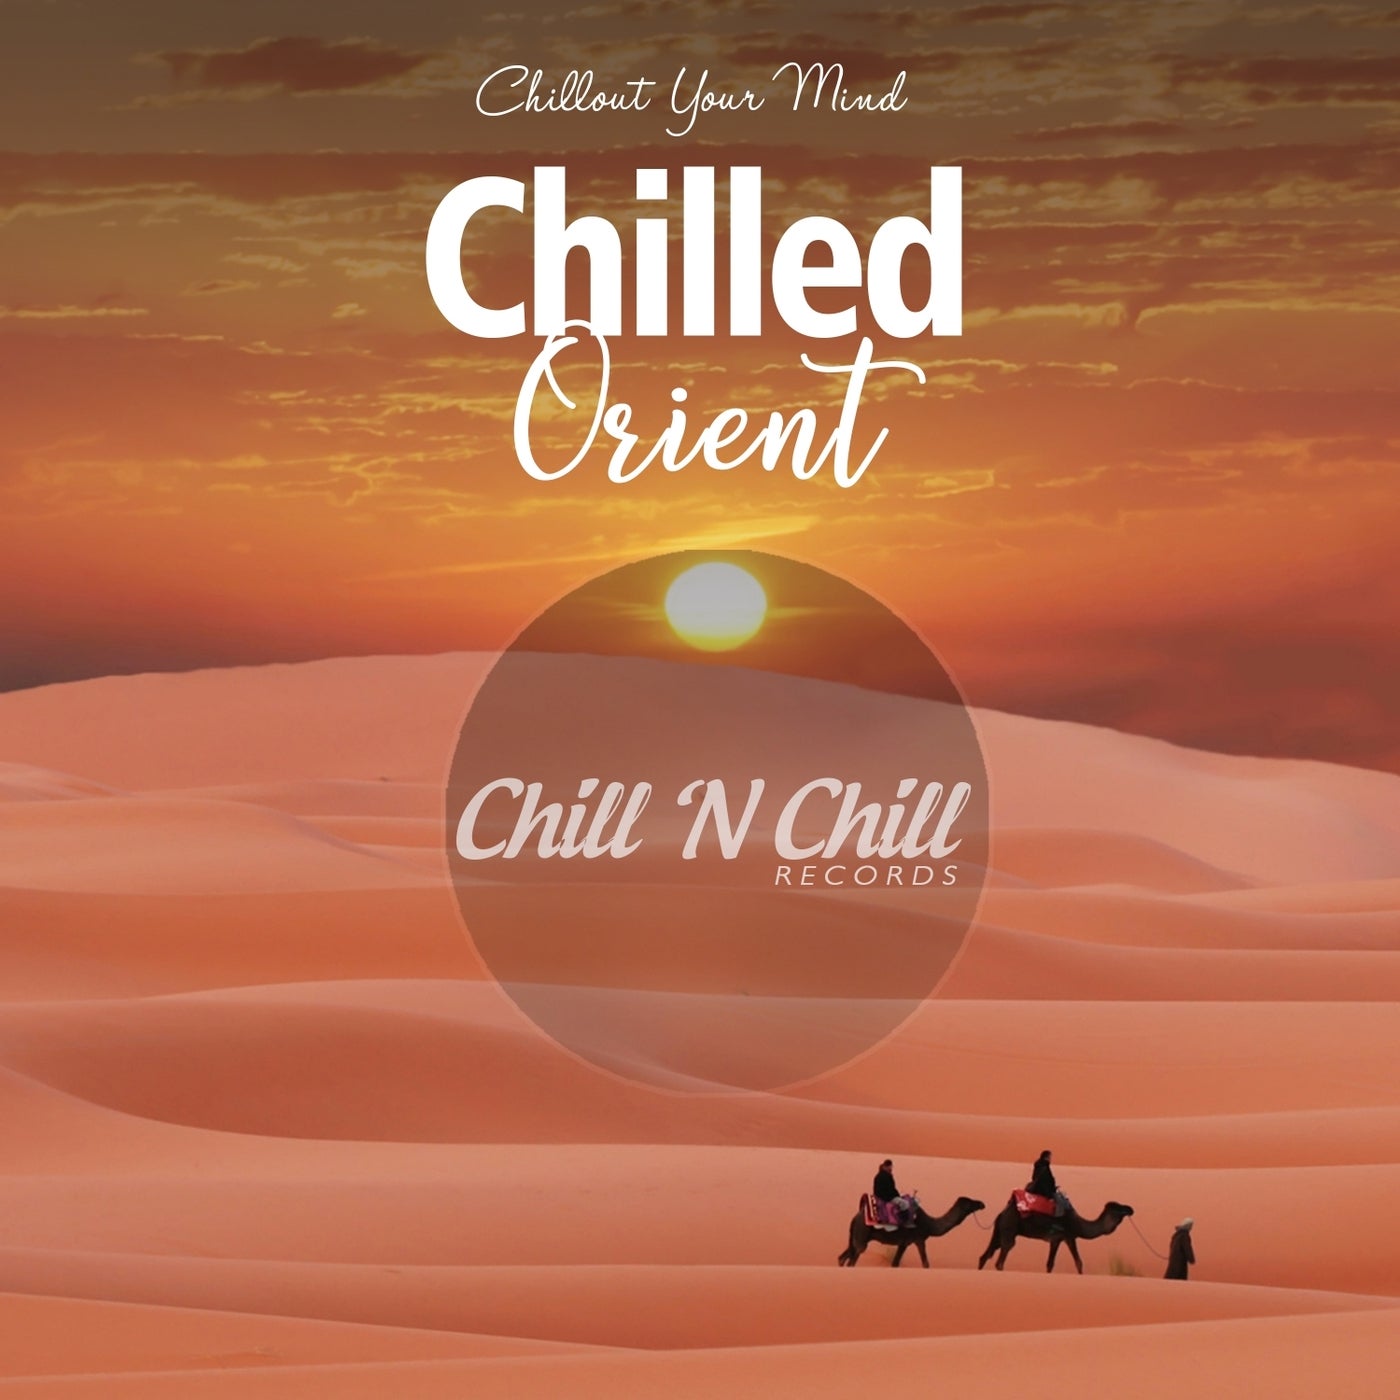 Chilled Orient: Chillout Your Mind